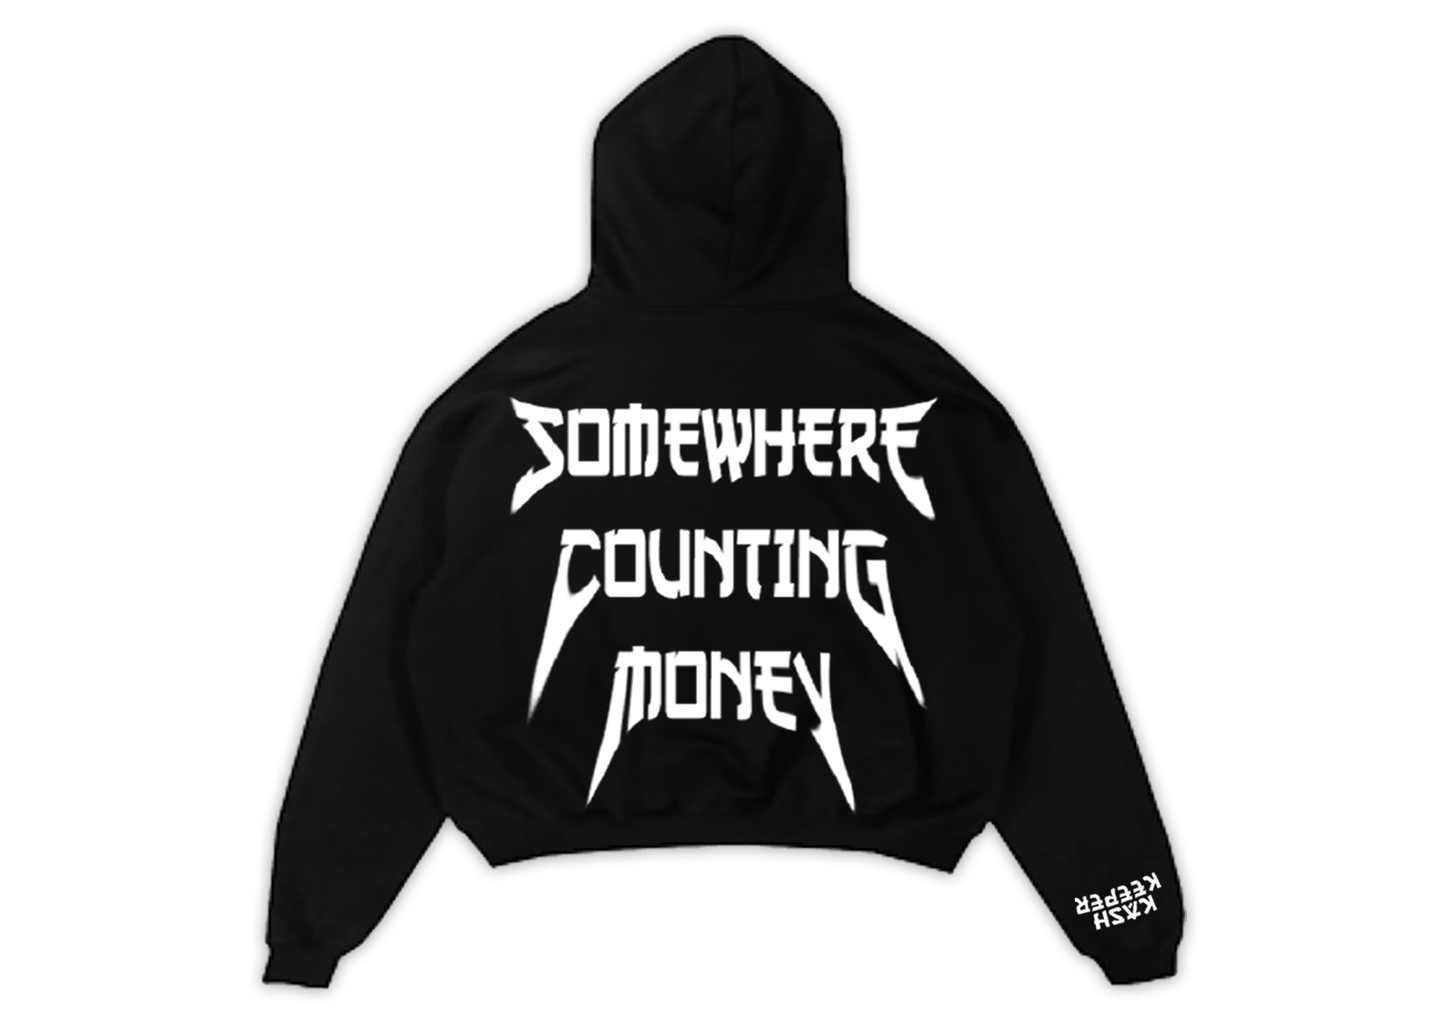 SOMEWHERE COUNTING MONEY HOODIE